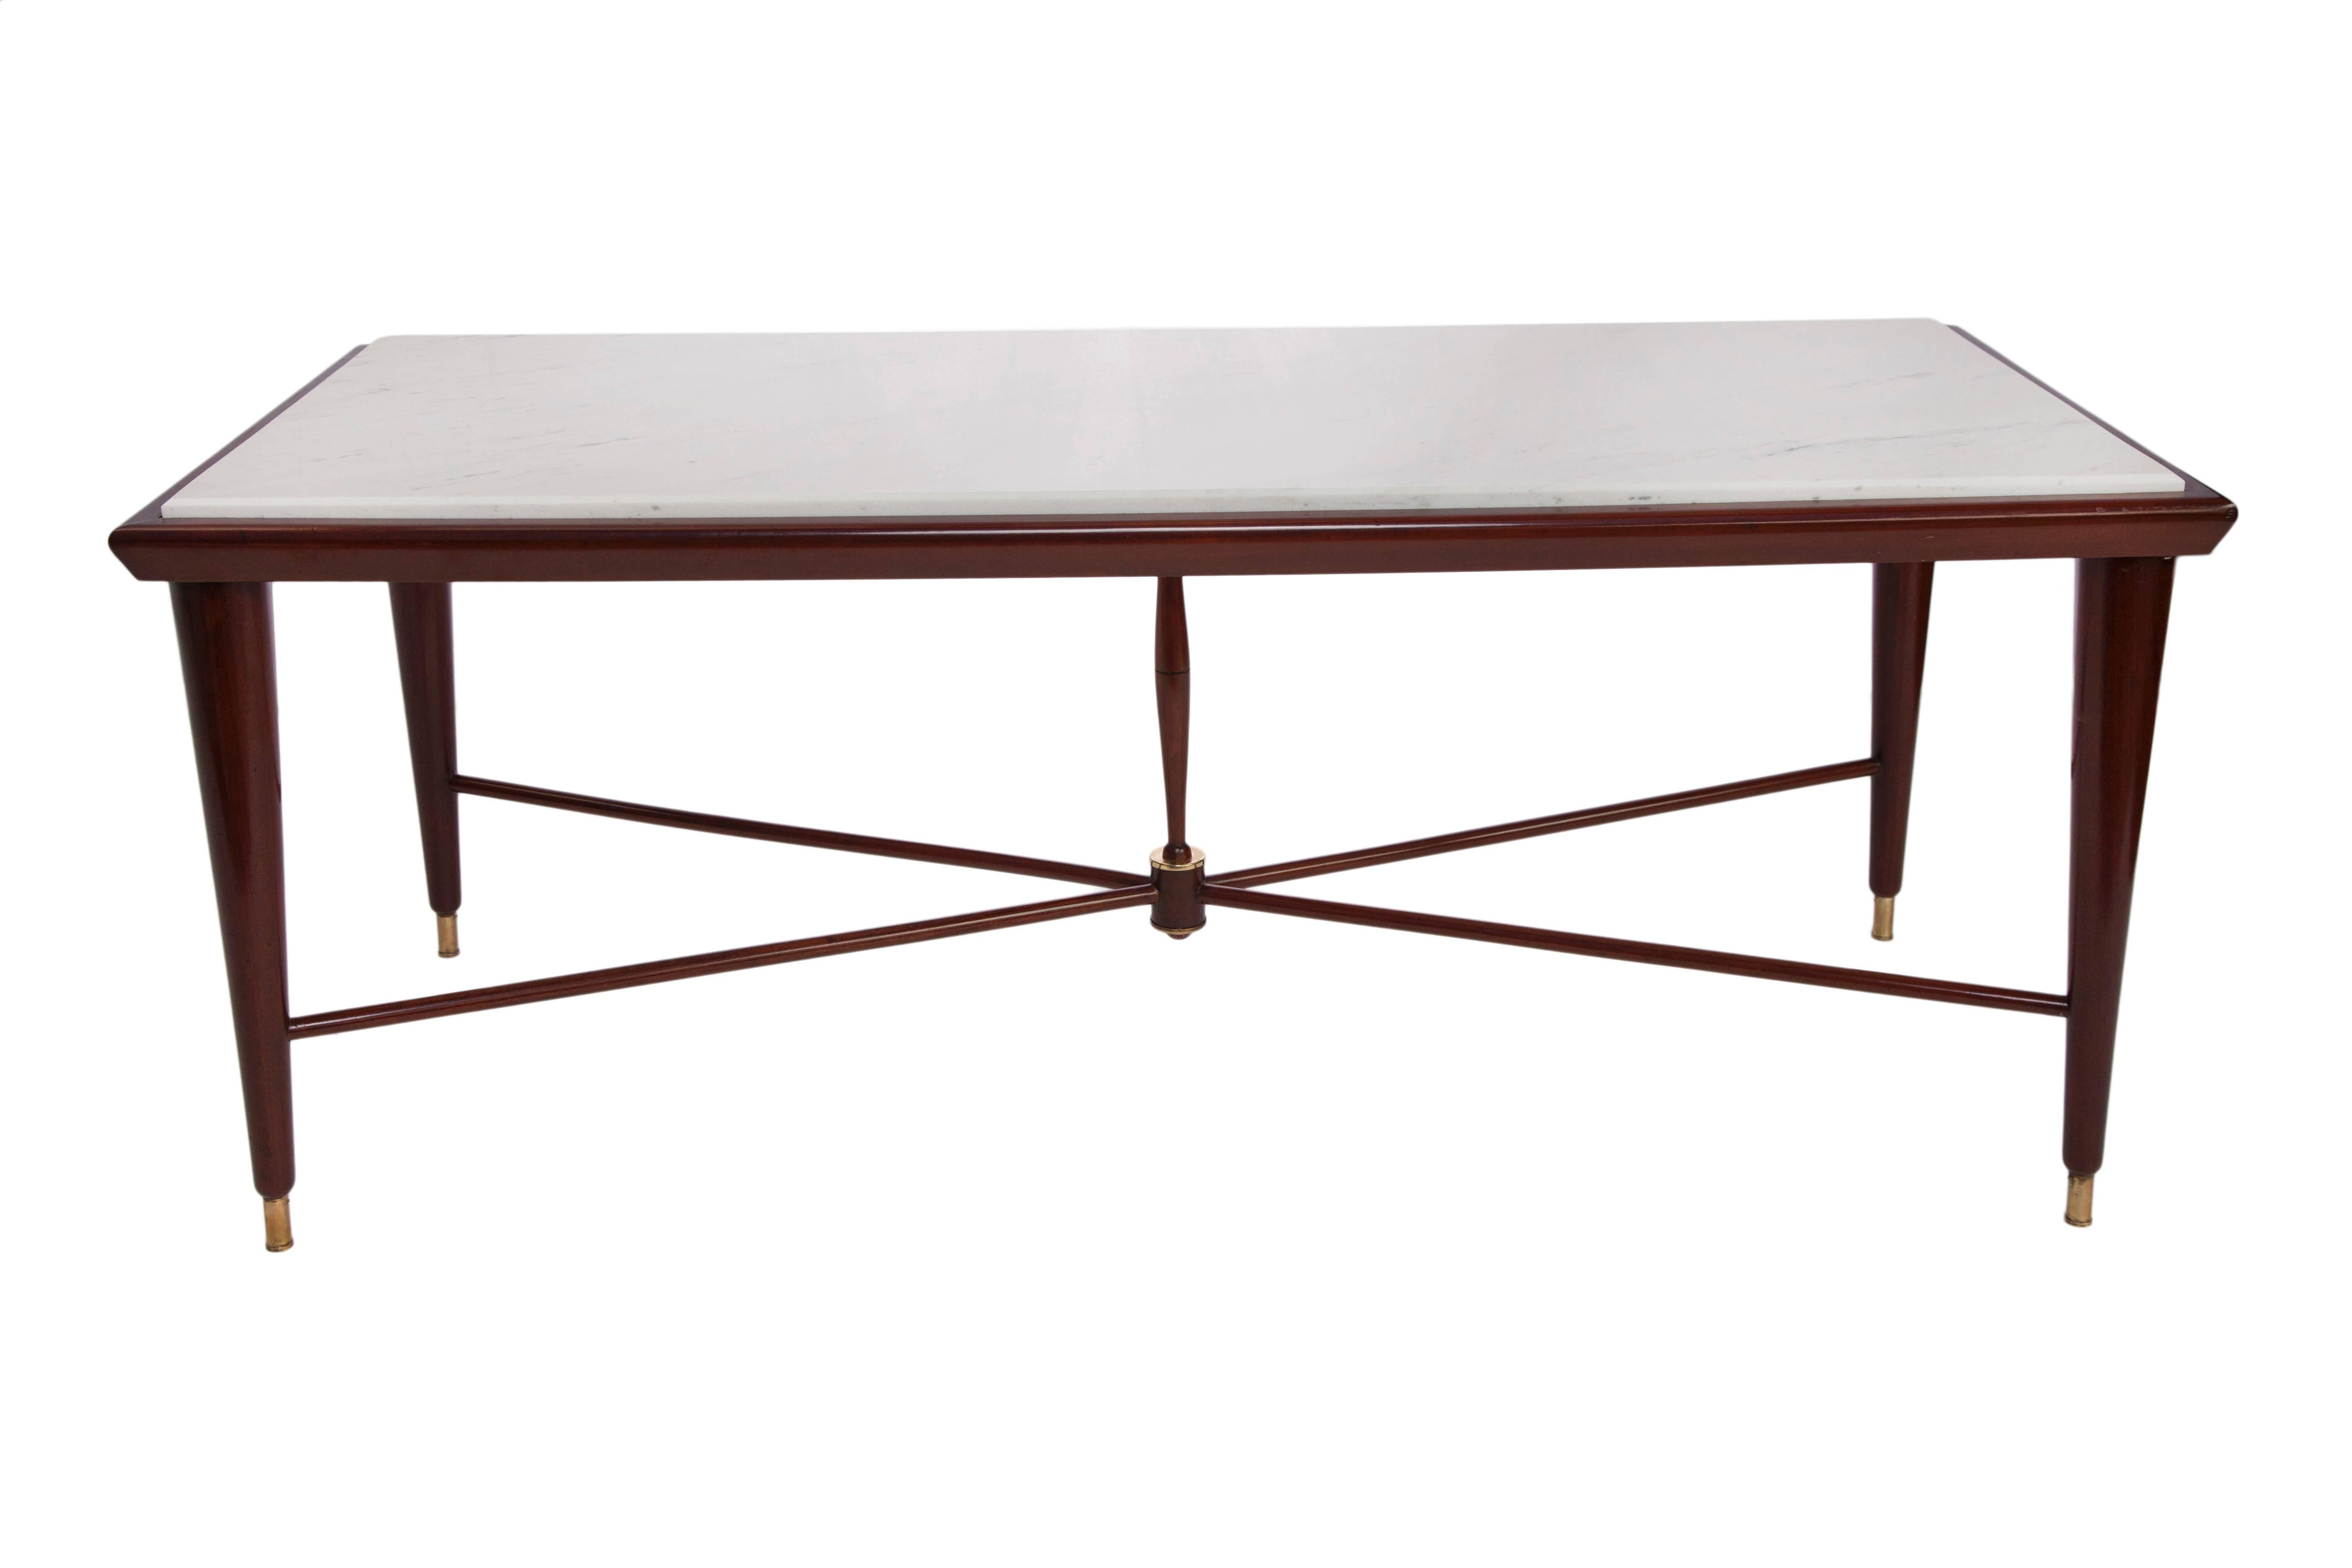 This Liceu de Artes e Ofícios 1960s coffee table, comes with a marble top on tapered legs, with crossed stretcher and central nucleus, accented with brass. The table remains in excellent vintage condition, consistent with age and use.